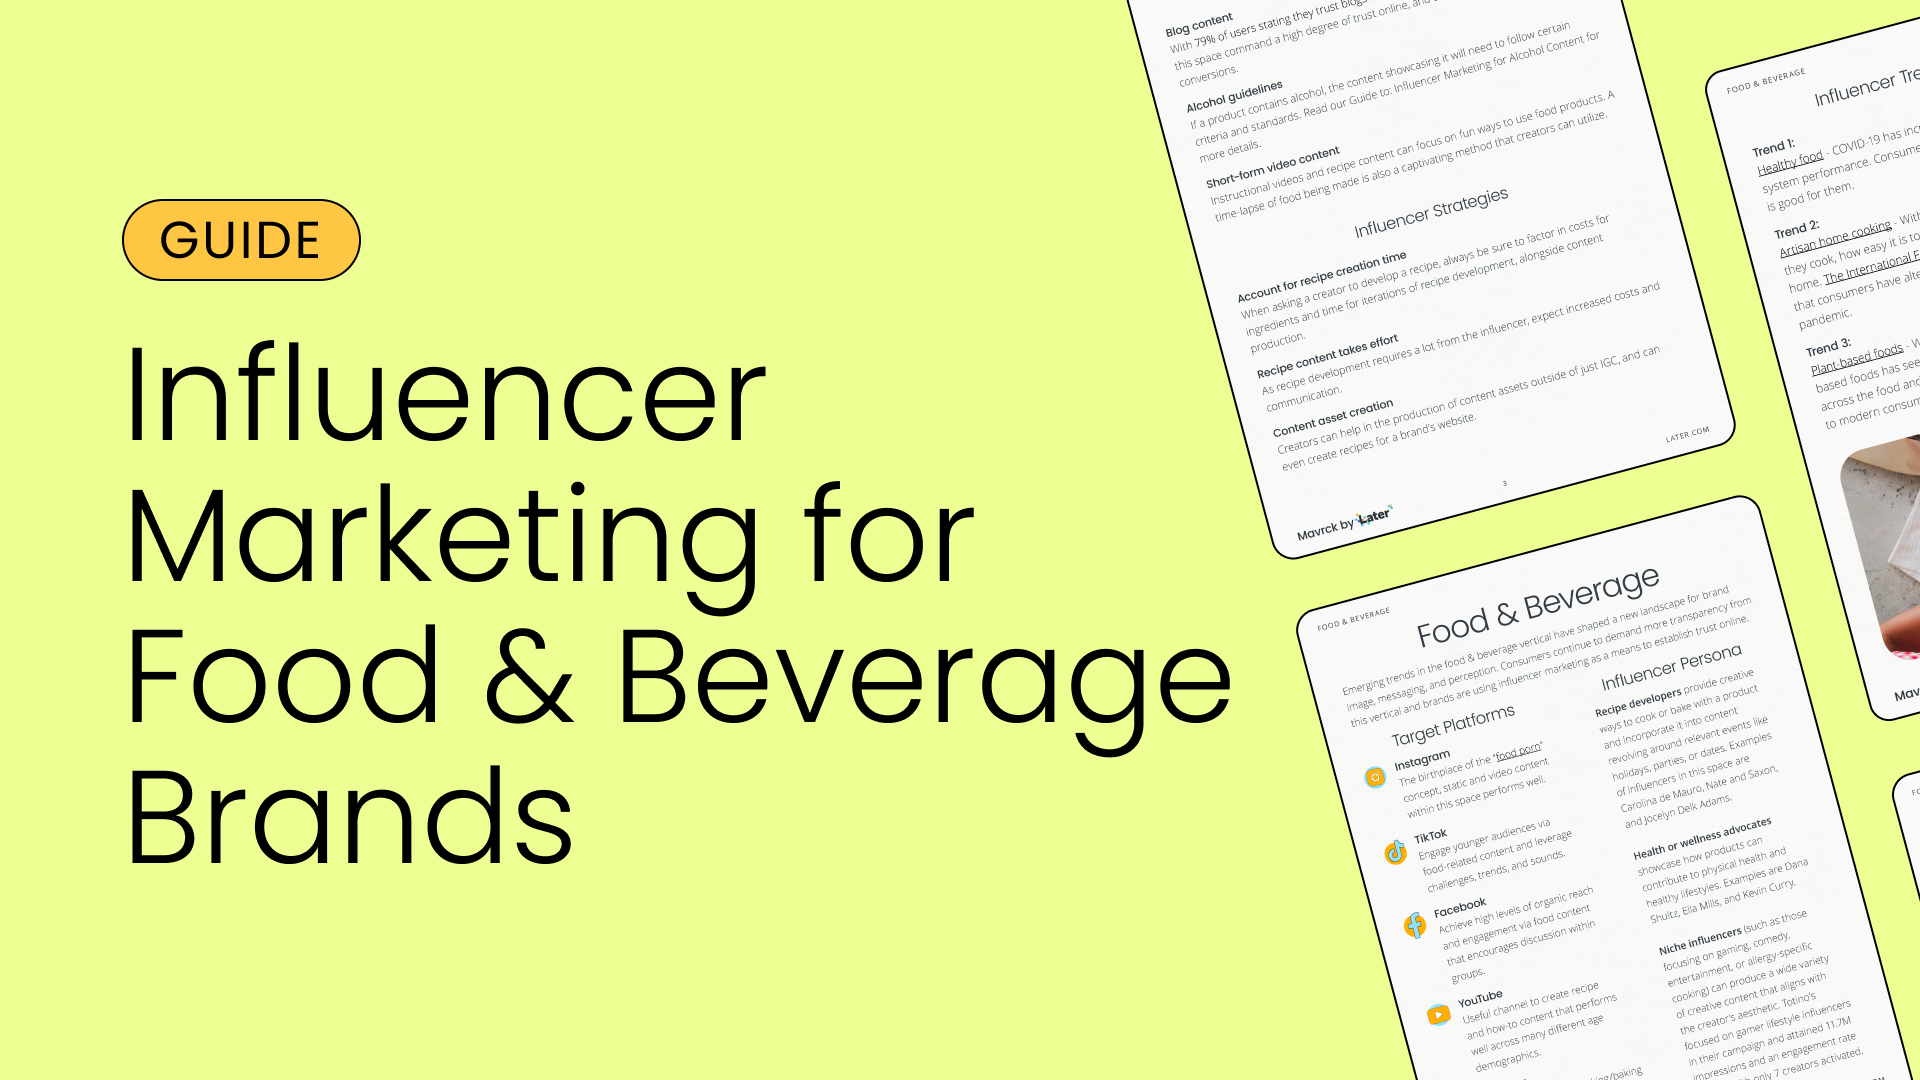 Free influencer marketing guide for food and beverage brands from Later